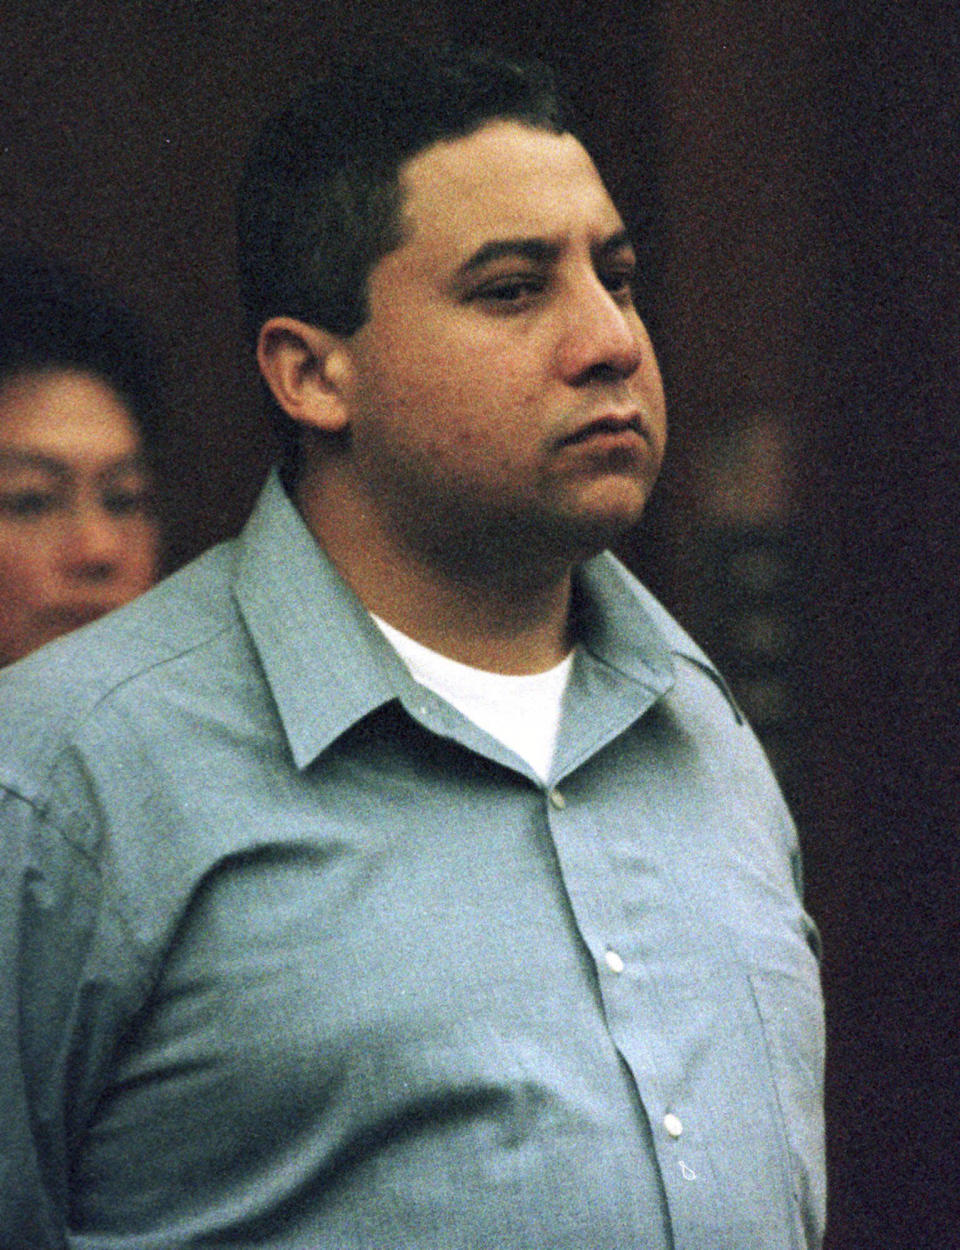 FILE - Albert "Ian" Schweitzer, accused of participating in the 1991 sexual assault, kidnapping, and murder of Dana Ireland, appears in a Hilo, Hawaii court on Monday, Jan. 24, 2000, during opening arguments in his trial. A petition filed Monday, Jan. 23, 2023, outlining new evidence in one of Hawaii's biggest criminal cases asks a judge to release Schweitzer, a Native Hawaiian man who has spent more than 20 years in prison for the attack of Ireland, a white woman, on the Big Island. (W.M. Ing/Hawaii Tribune-Herald via AP, Pool)